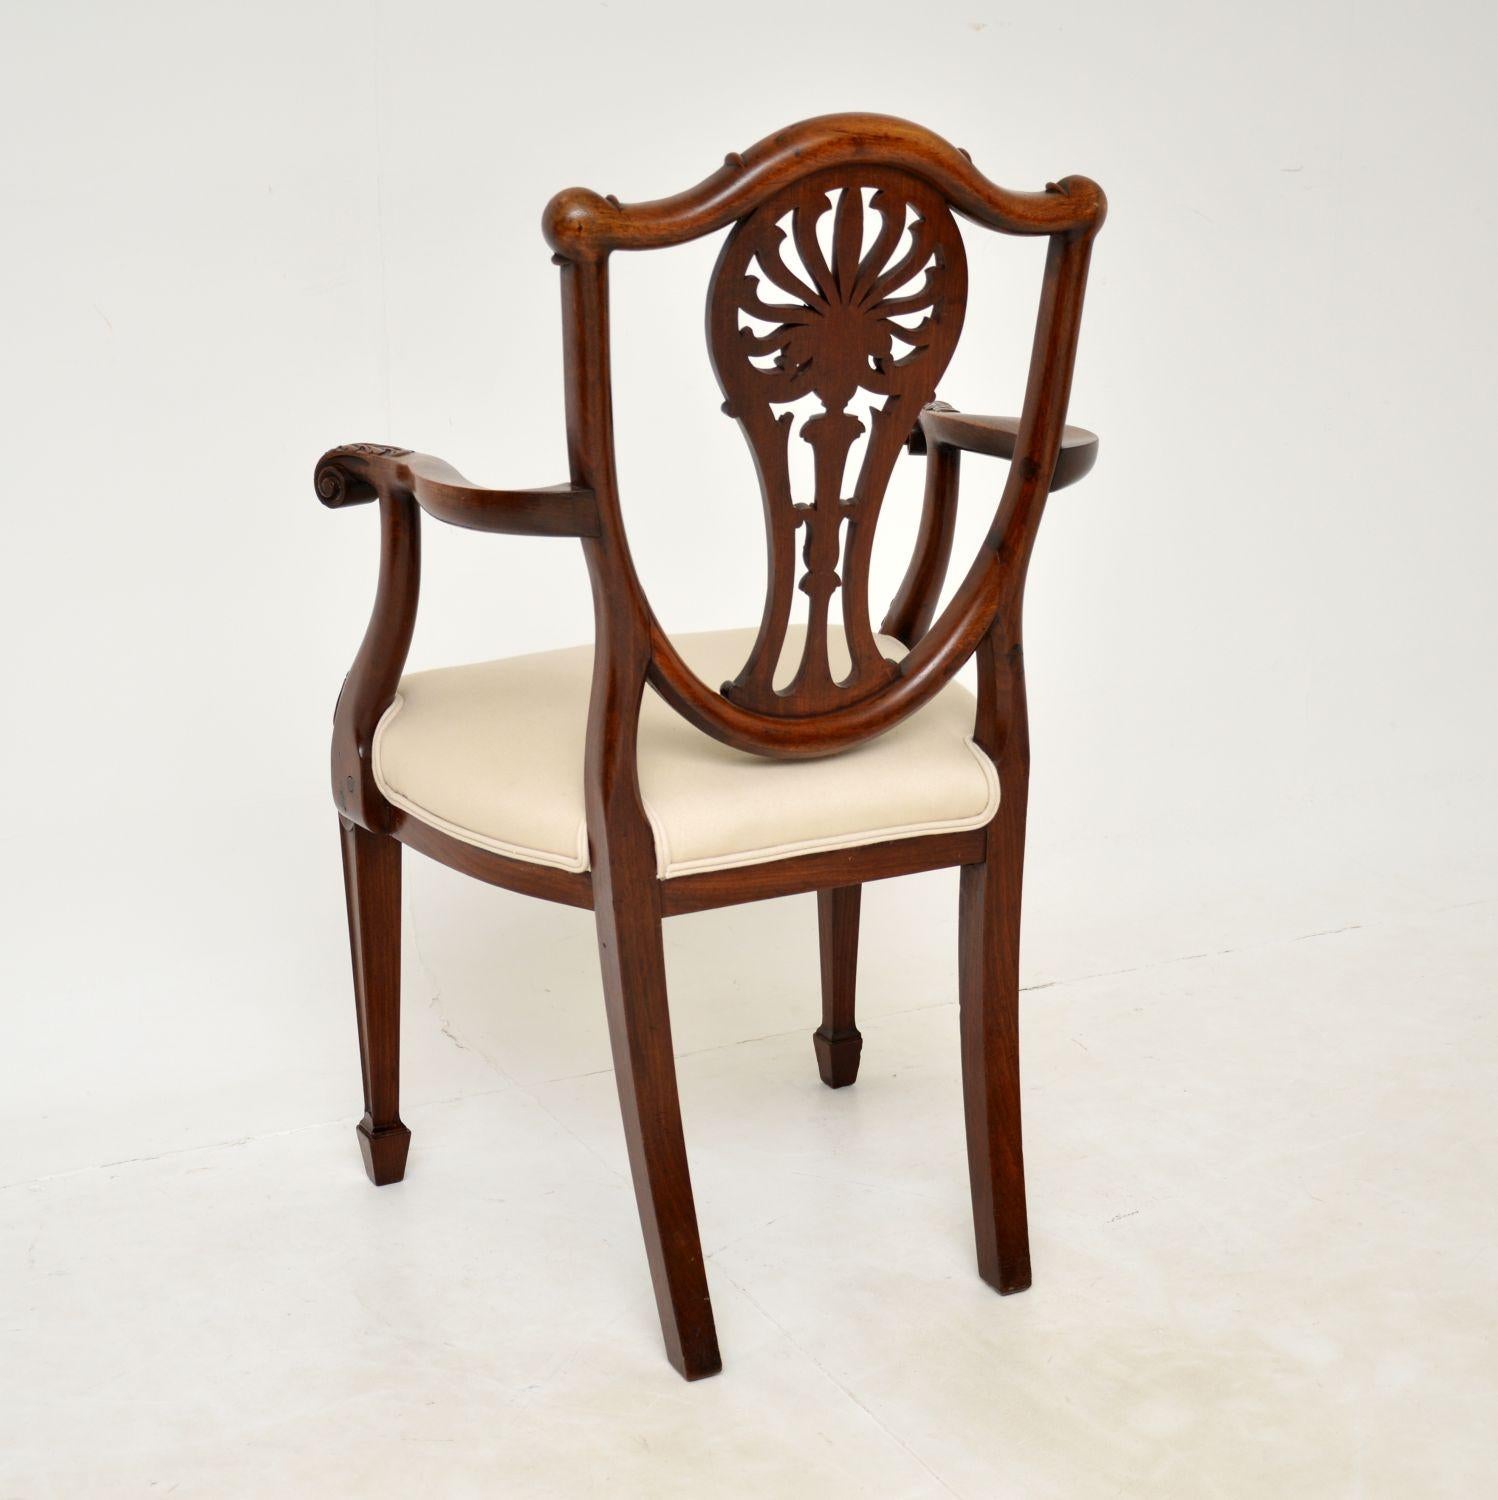 Georgian Antique Victorian Carved Armchair / Desk Chair For Sale